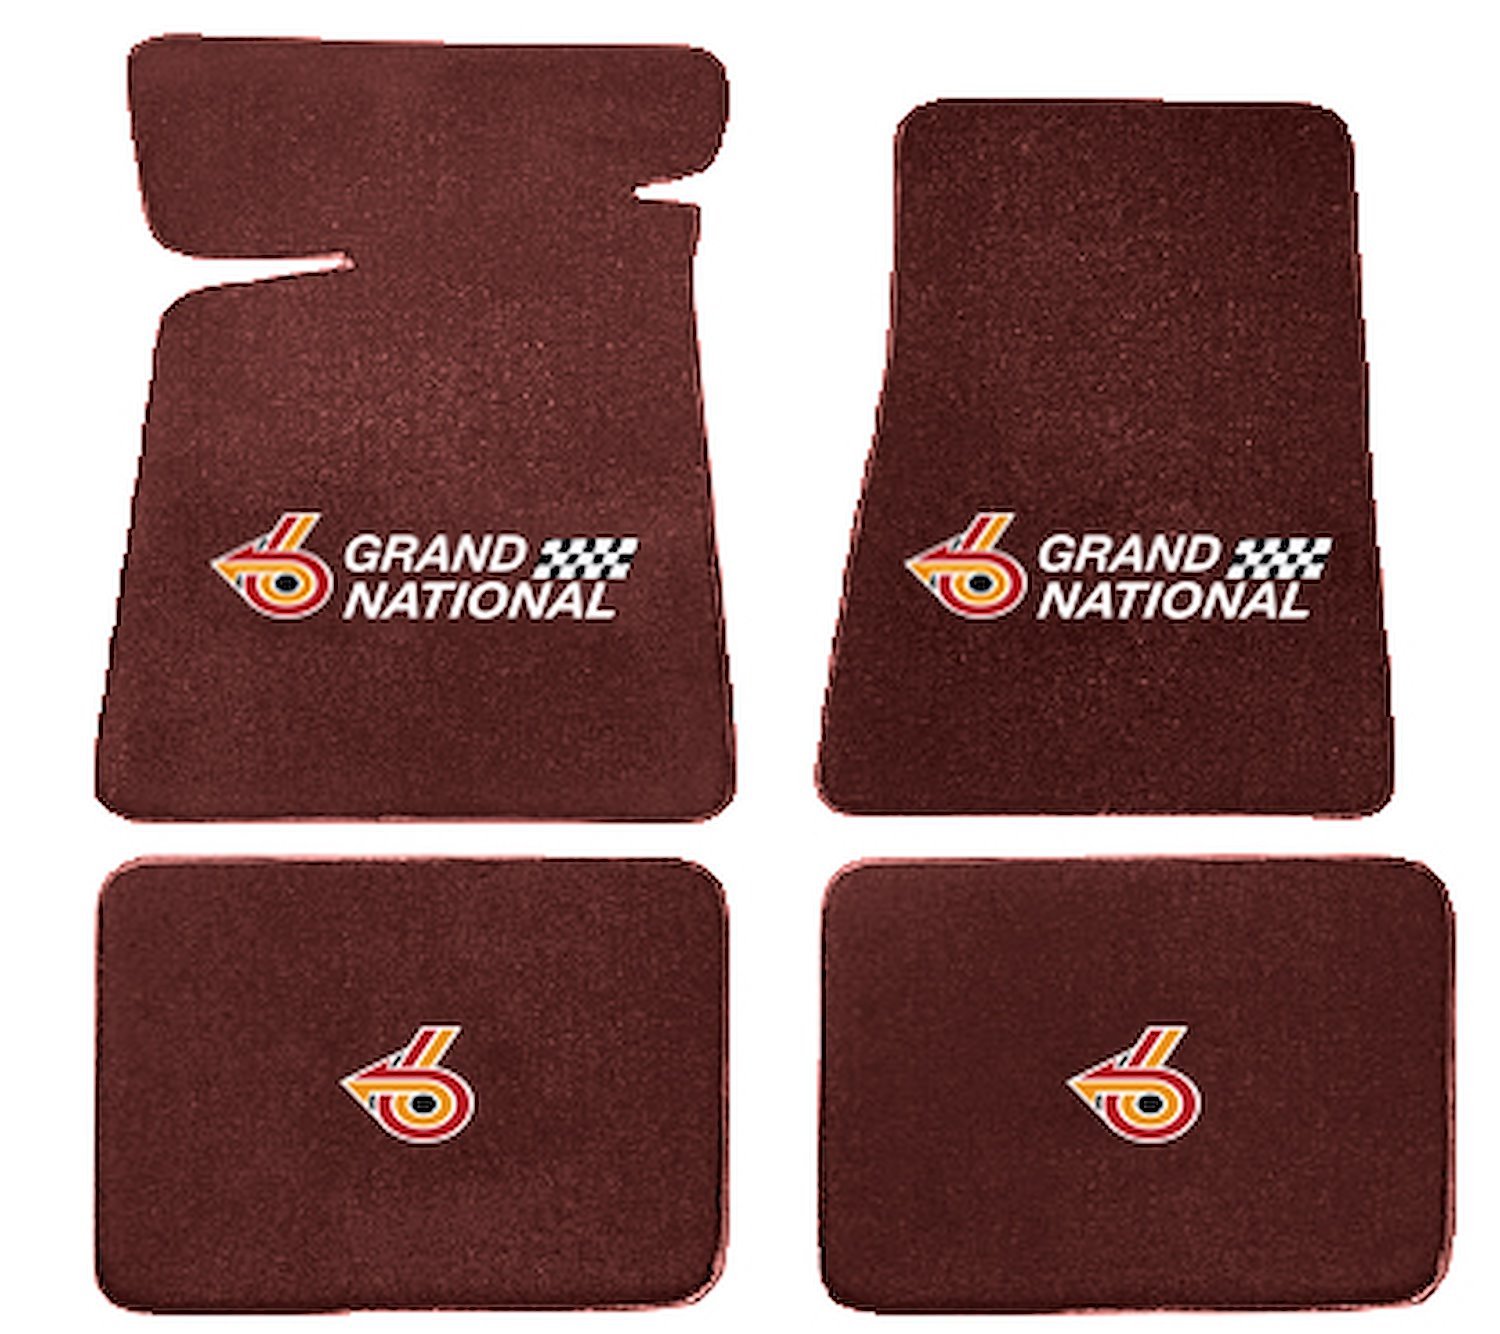 Molded Cut Pile Floor Mats for 1984-1987 Buick Regal Grand National [4-Piece, W/Grand National Logo, Claret/Oxblood]